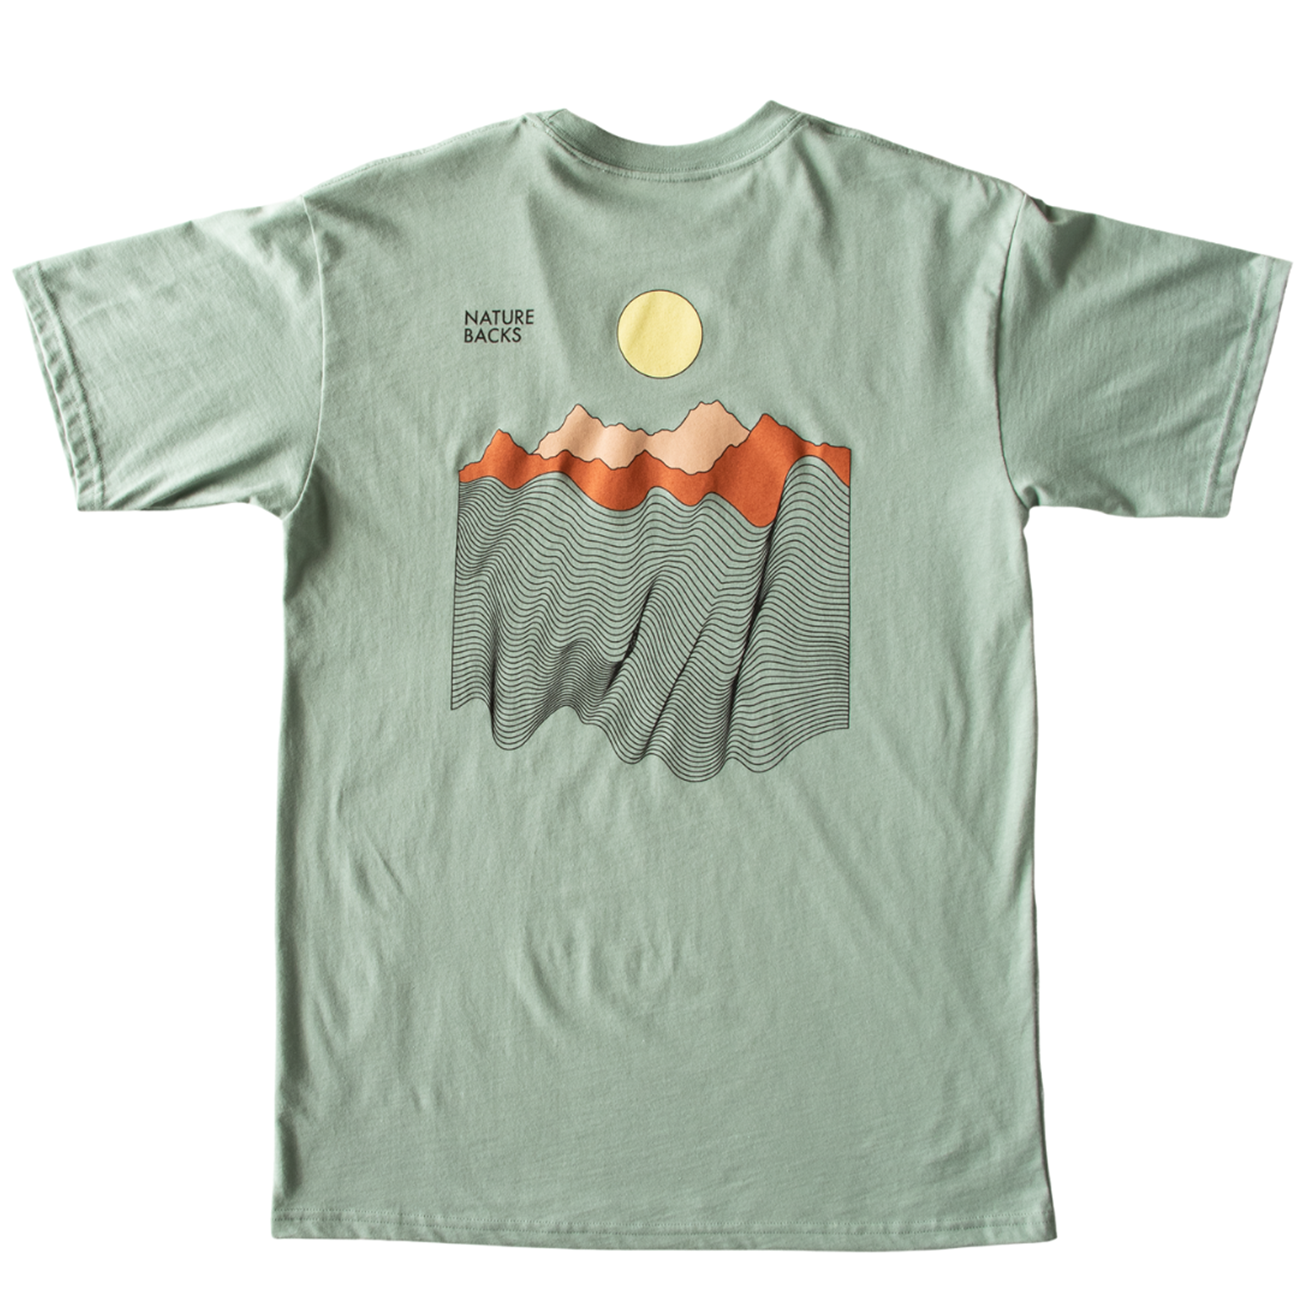 Nature Backs Limited Edition Short Sleeve 100% Organic Cotton T-Shirt | Limited Ebb and Flow Bay Short Sleeve made with Eco-Friendly Fibers Sustainably made in the USA 